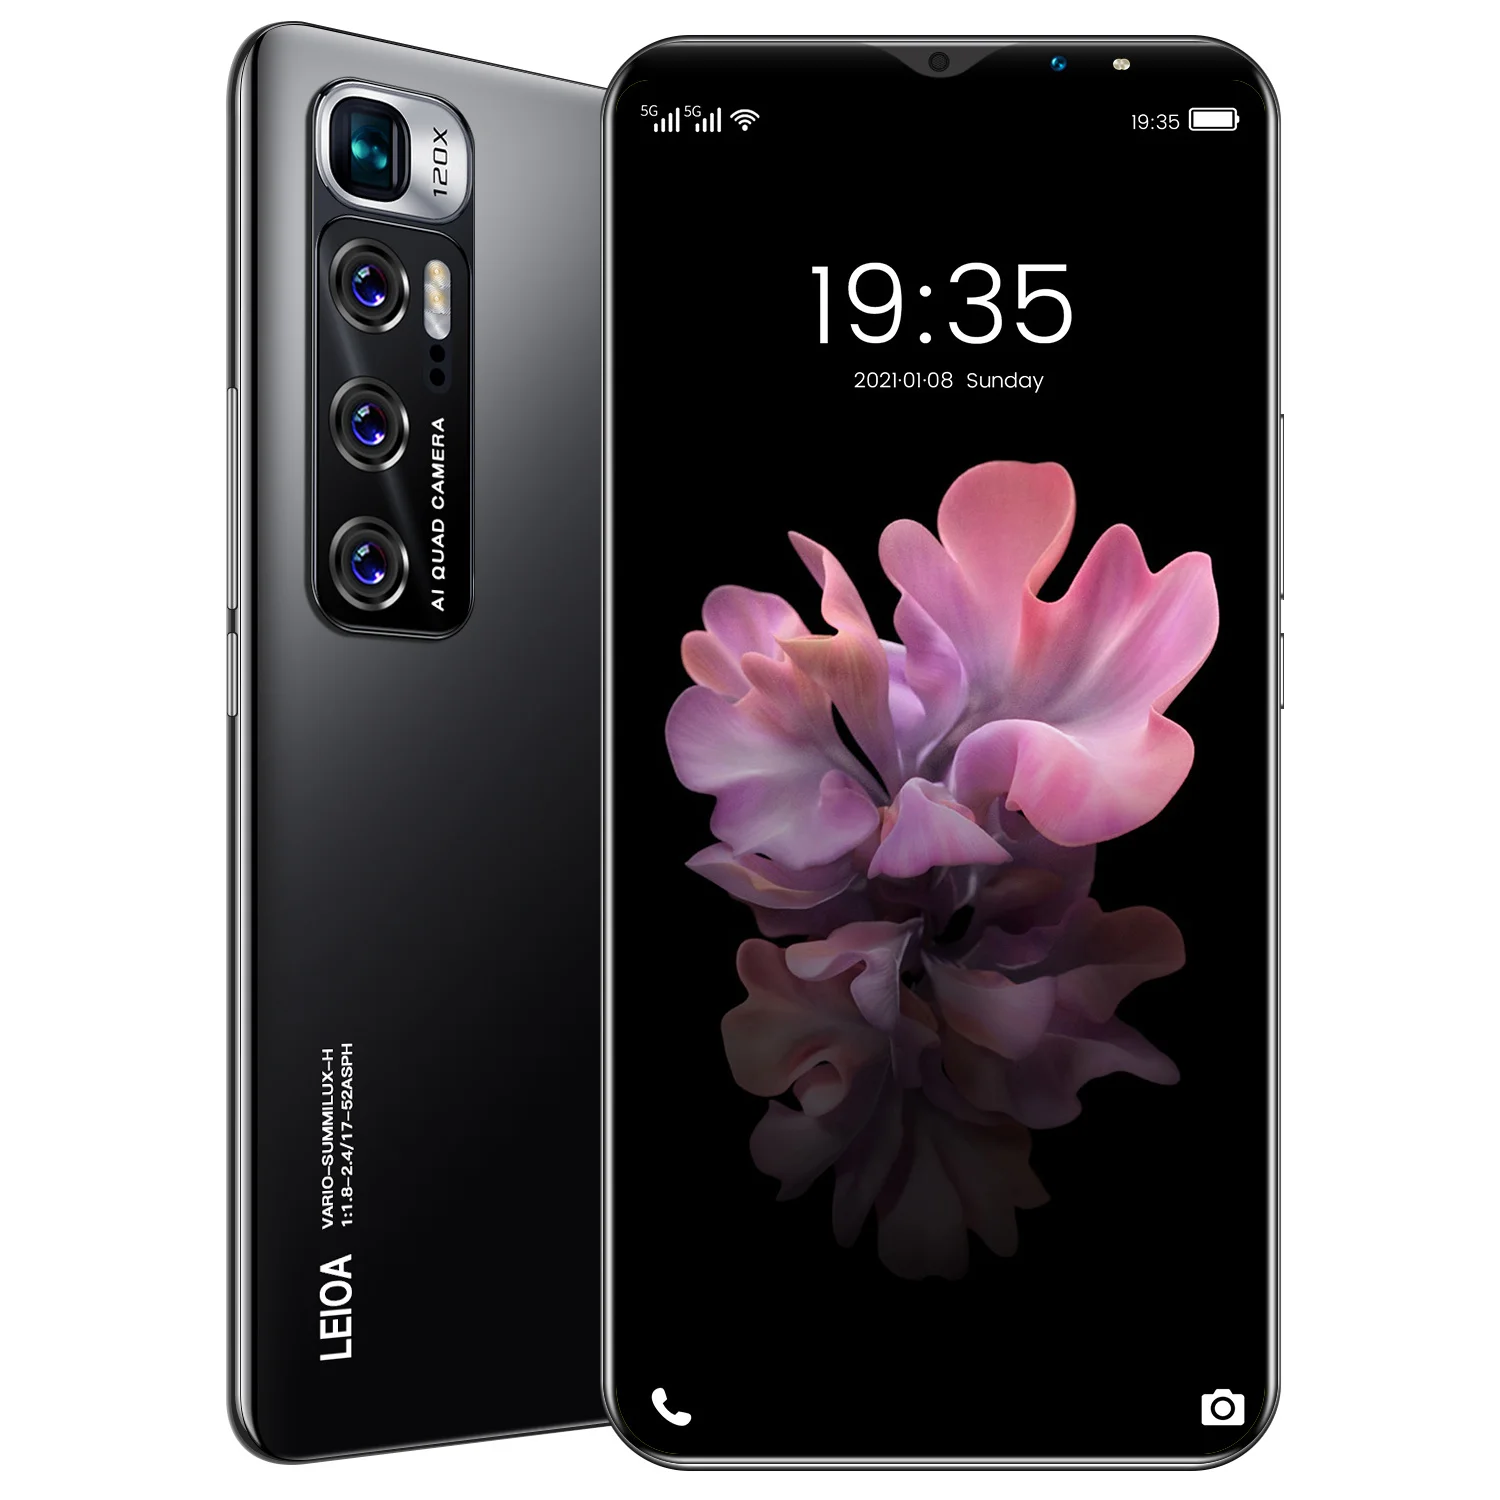 

Face Unlock Wifi 5G Dual Card Flash Lamp Android 10.0 6.1 Inch HD Full Screen M10 Plus Mobile Smartphone, 3 colors